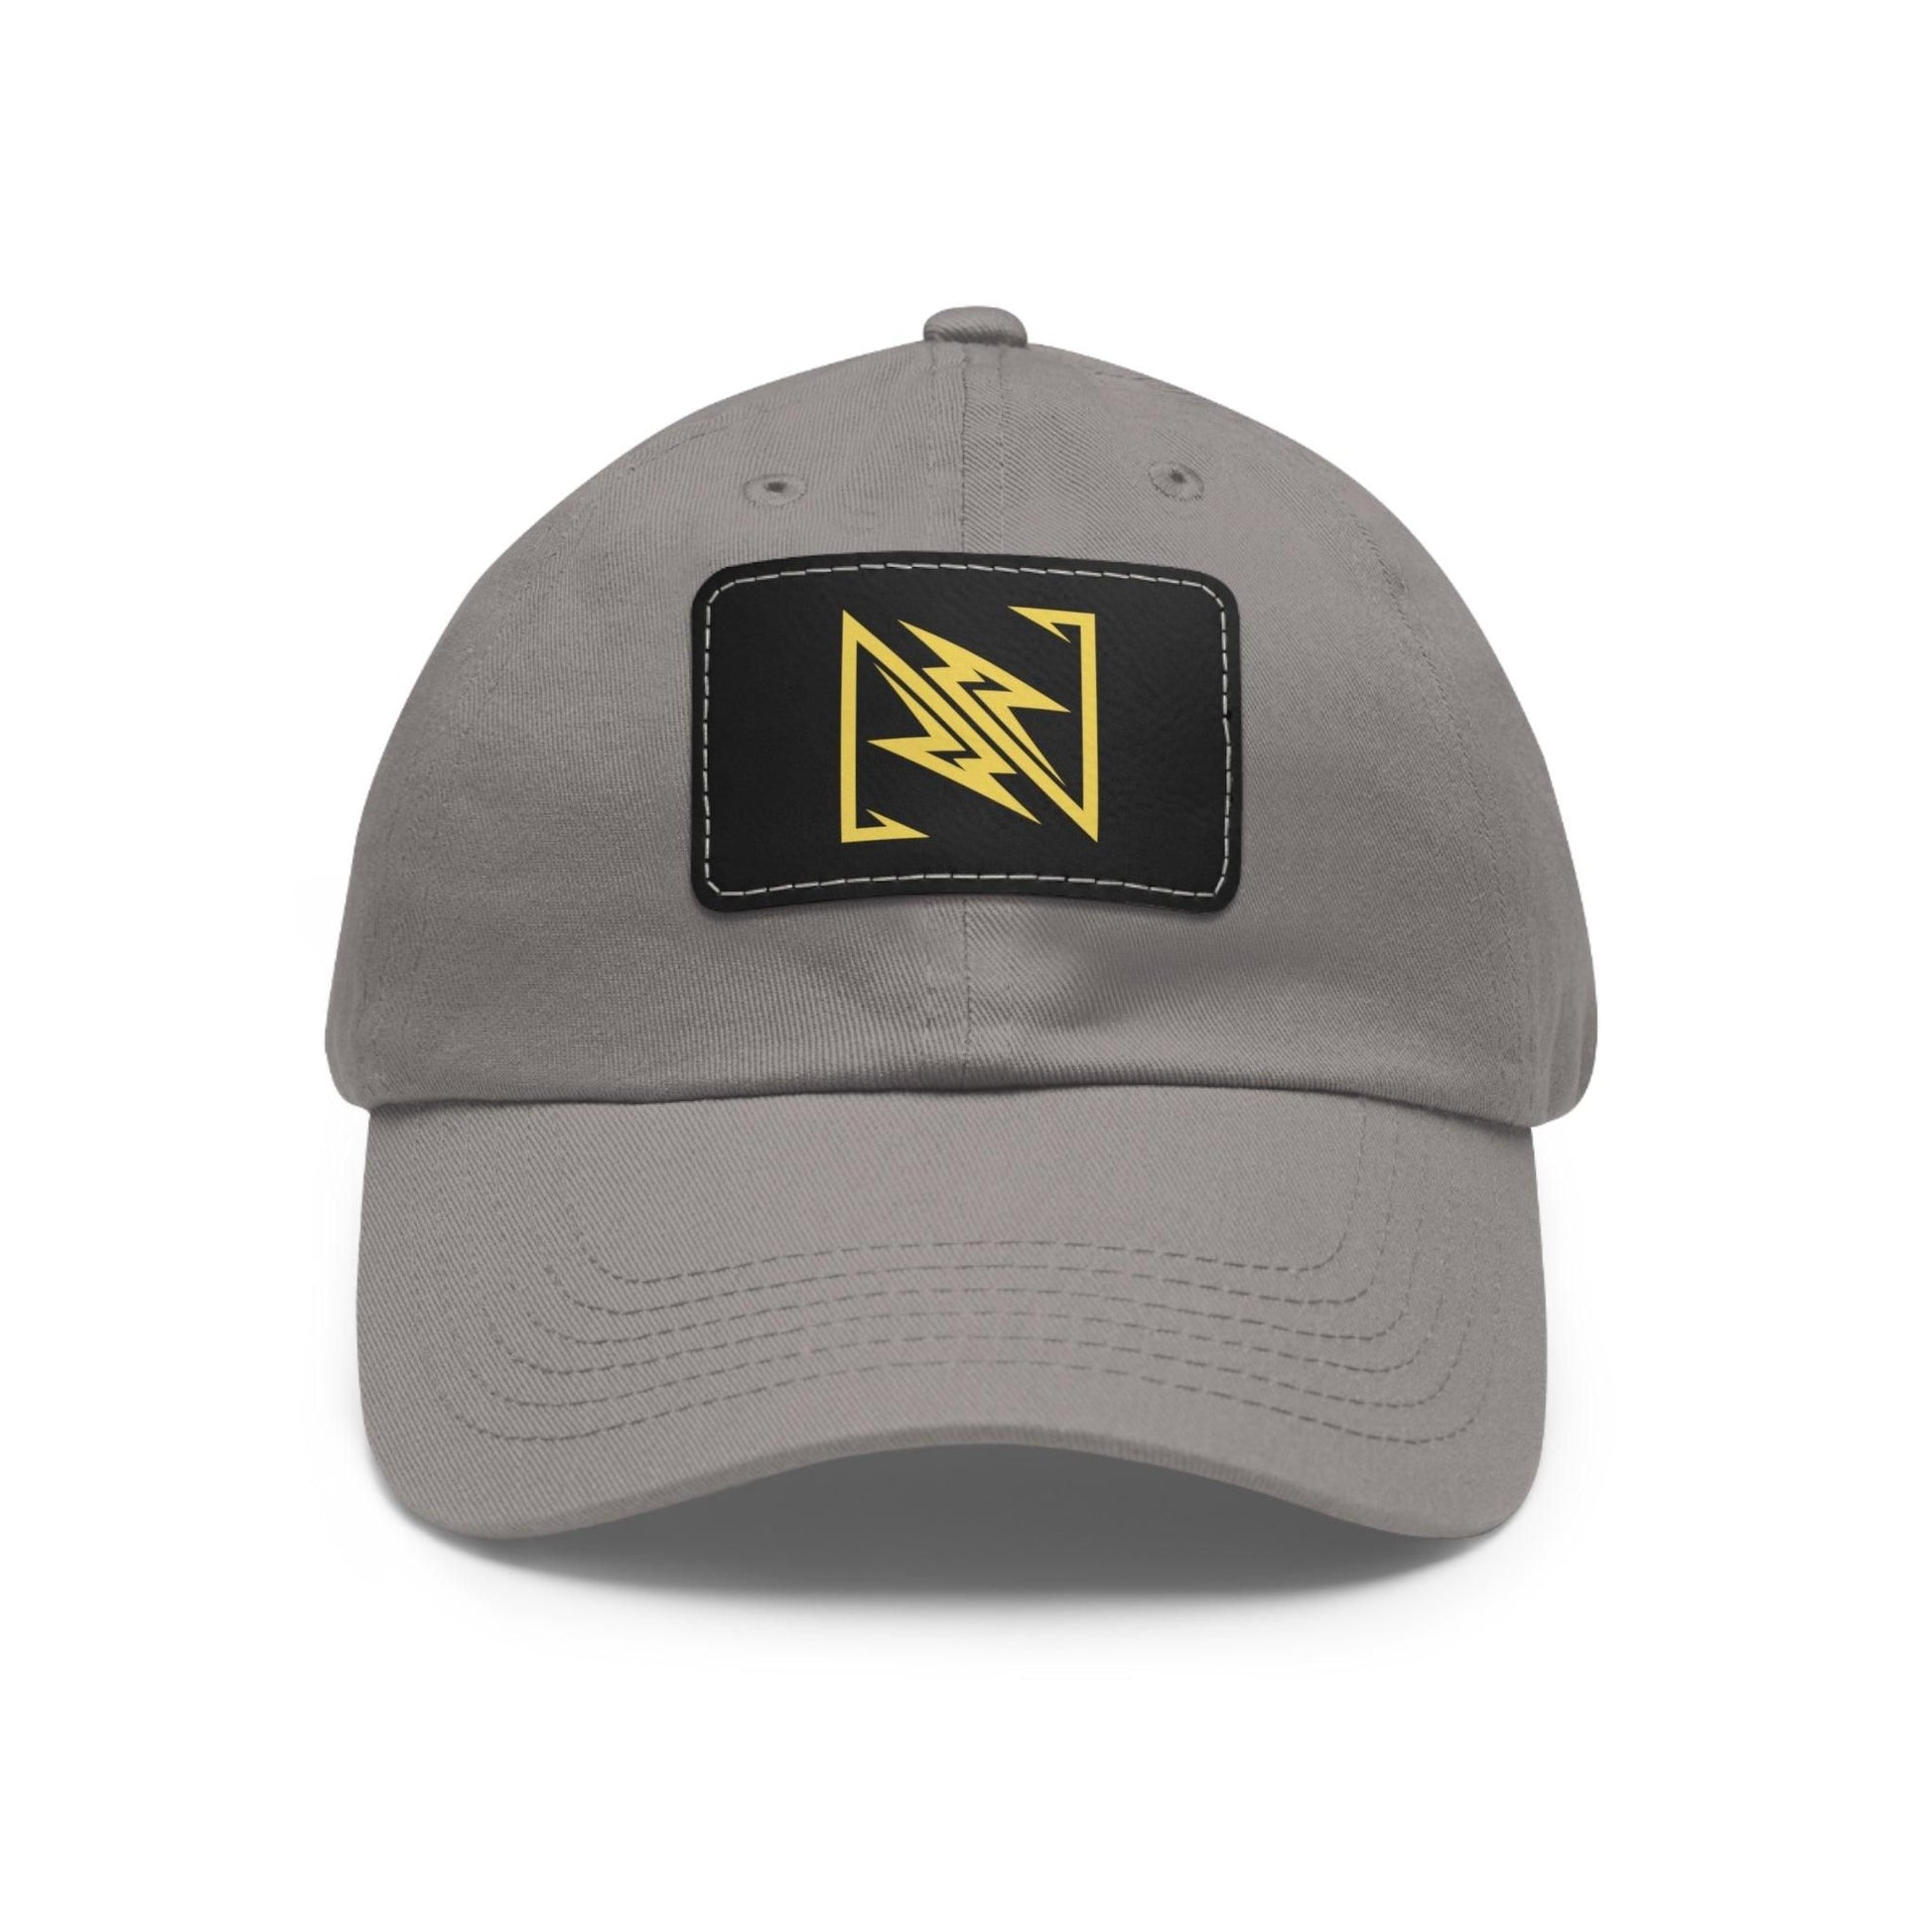 NX Vogue Premium Baseball Hat with Leather Patch Cap Grey / Black patch Rectangle One size